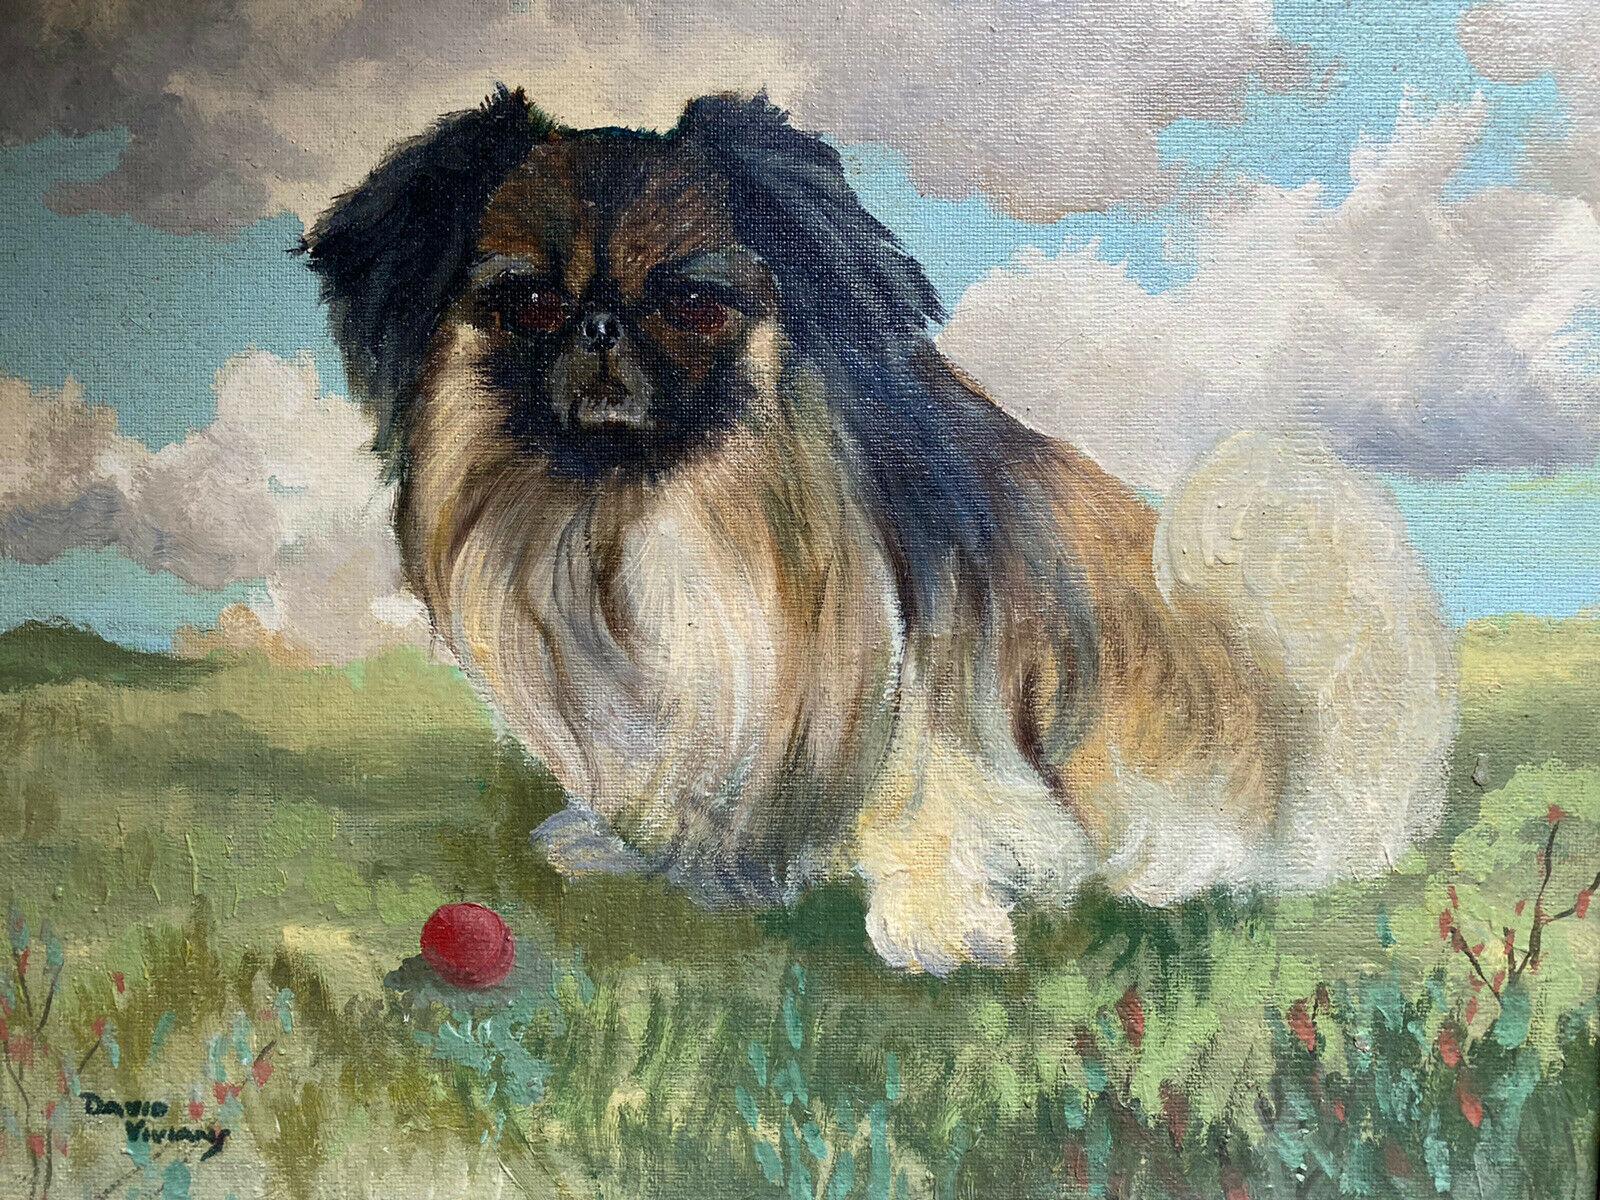 David Vivian Animal Painting - SIGNED 1950'S ENGLISH DOG OIL PAINTING - THE PEKINGESE WITH BALL IN LANDSCAPE